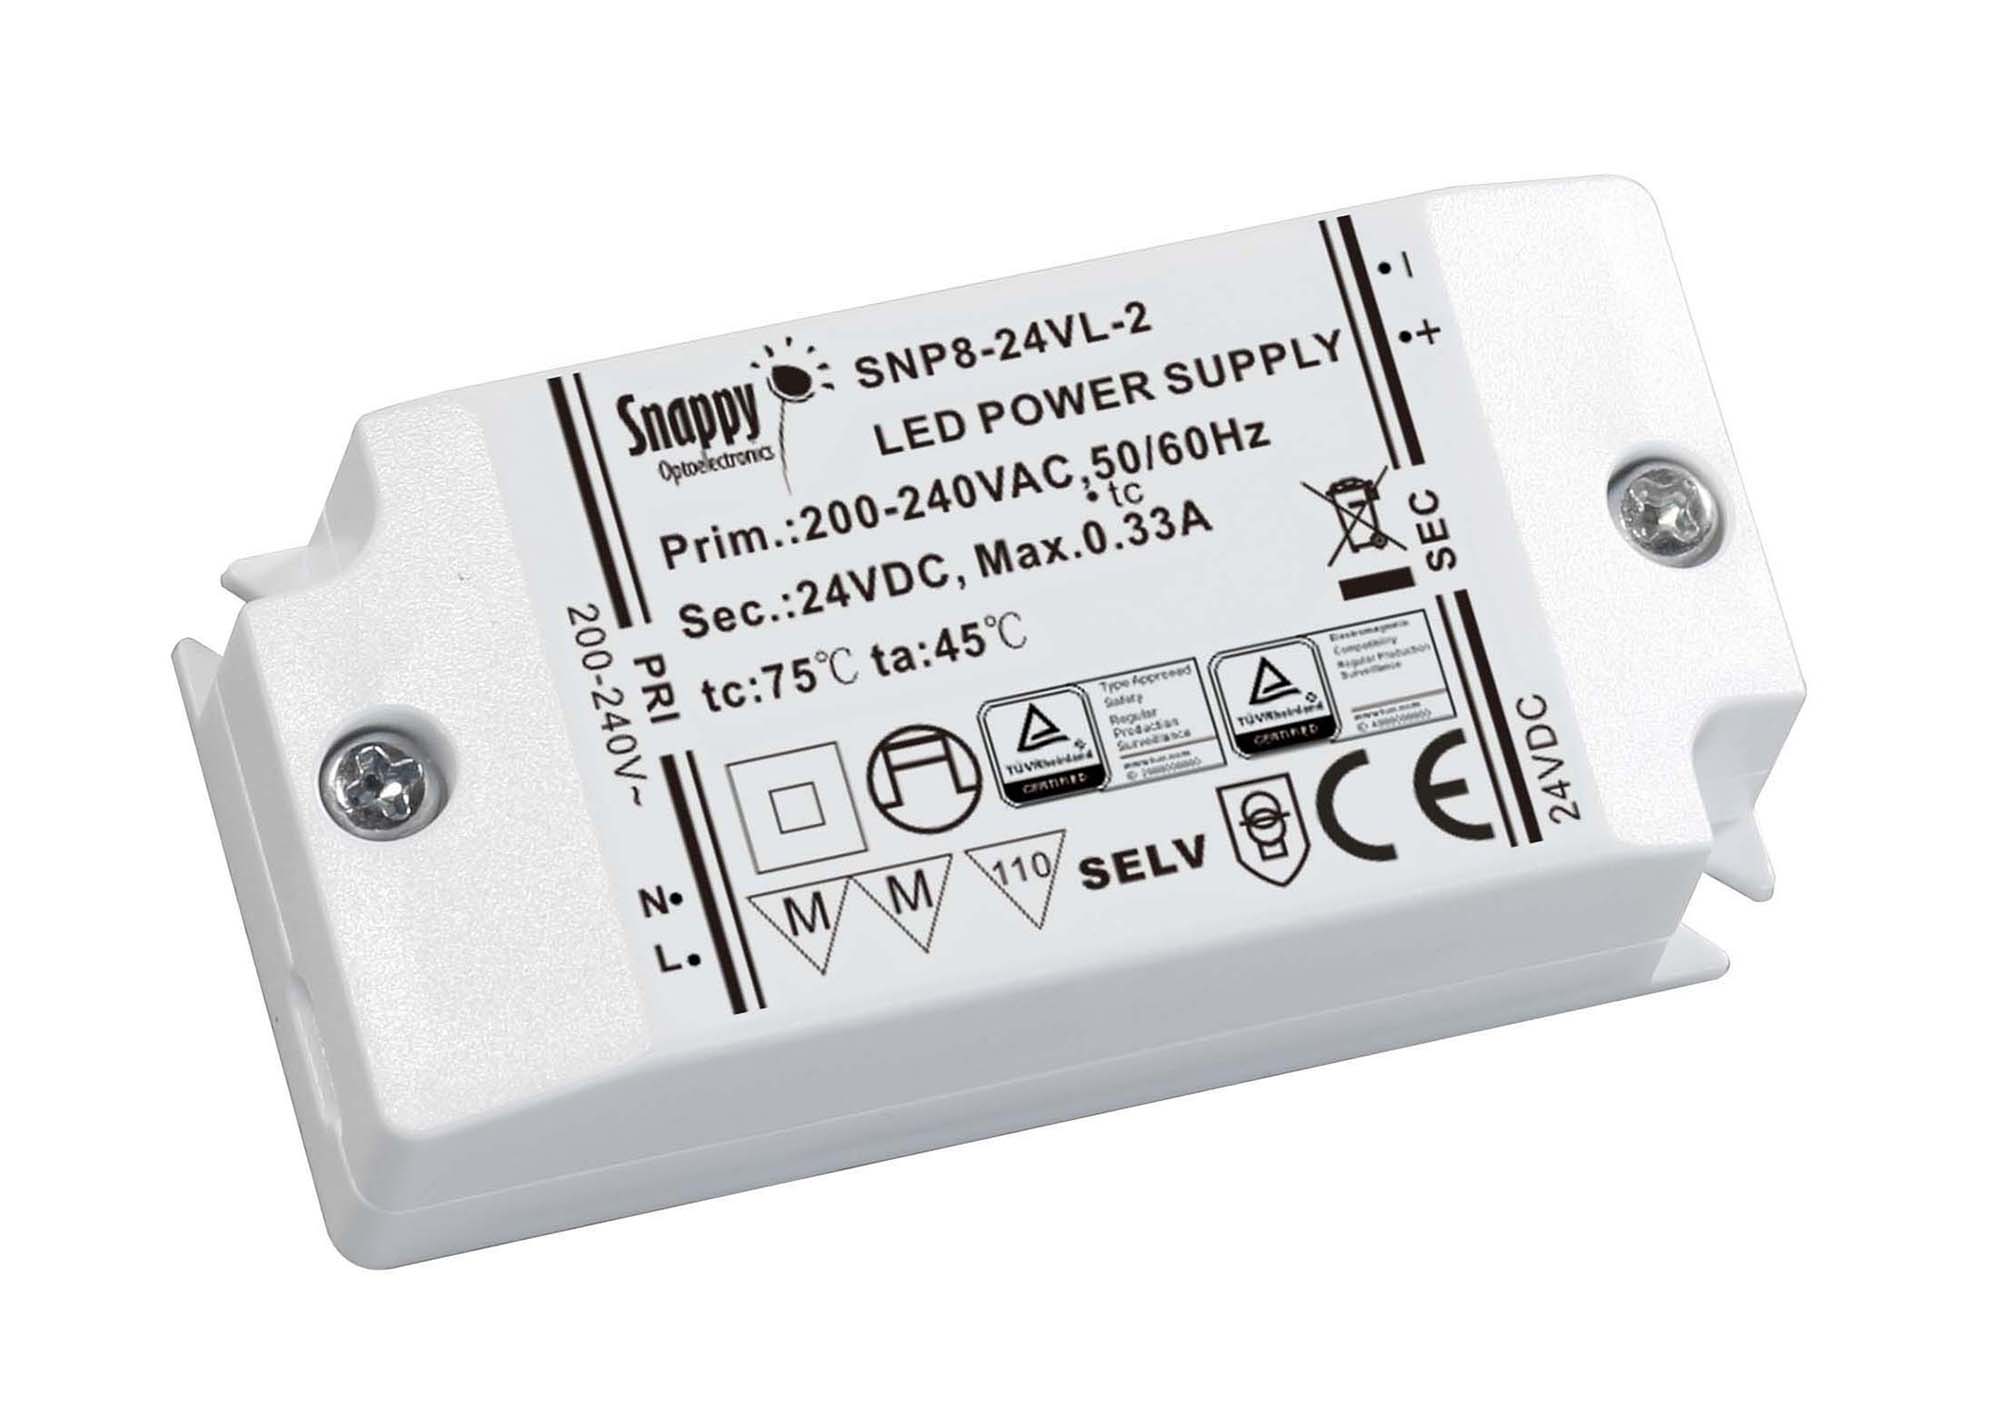 SNP8-24VL-2  8W Constant Voltage Non-Dimmable LED Driver 24VDC 0.33A IP20